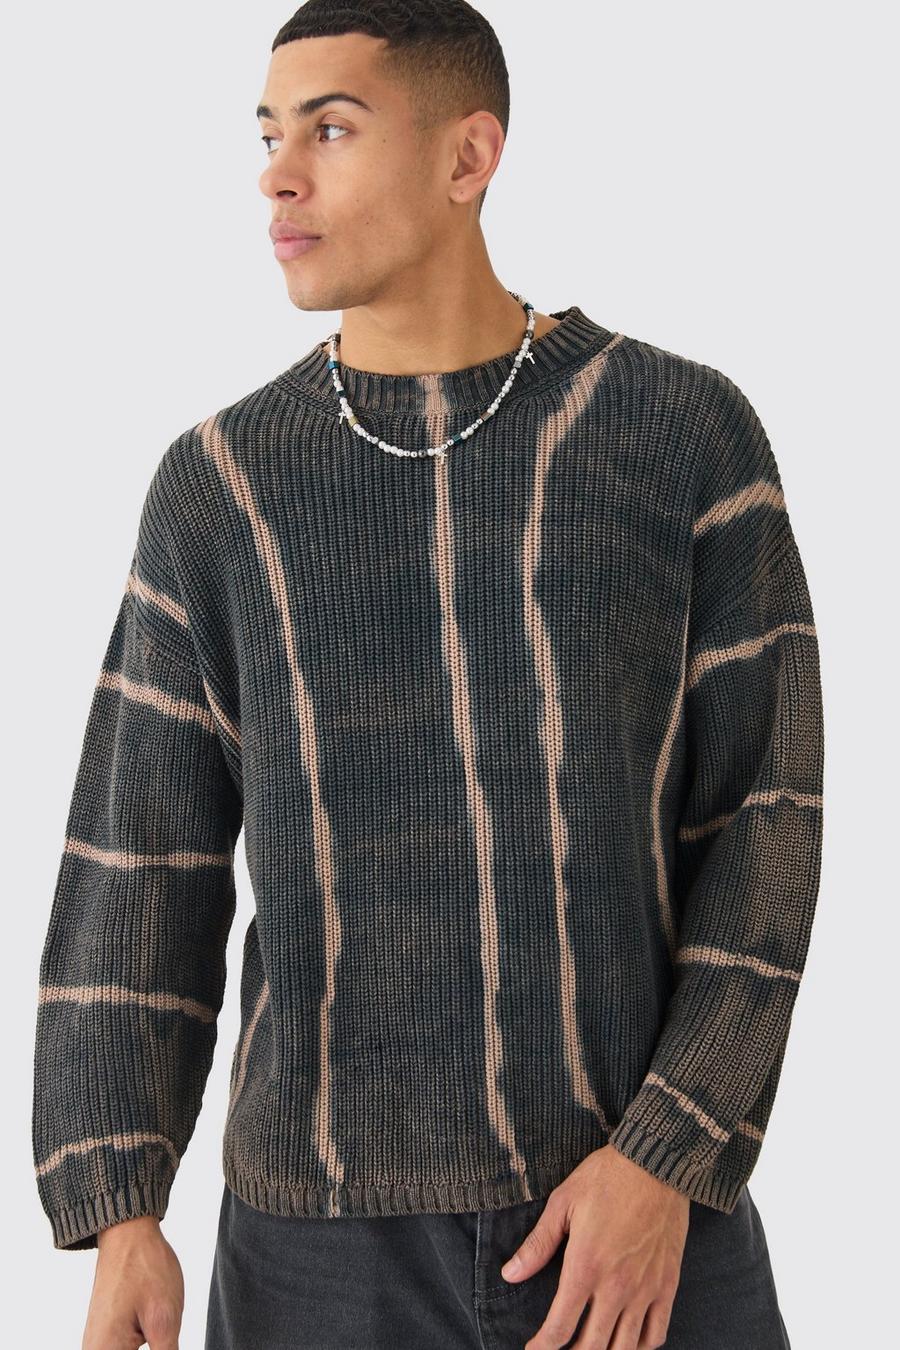 Oversized Boxy Stone Wash Jumper In Charcoal